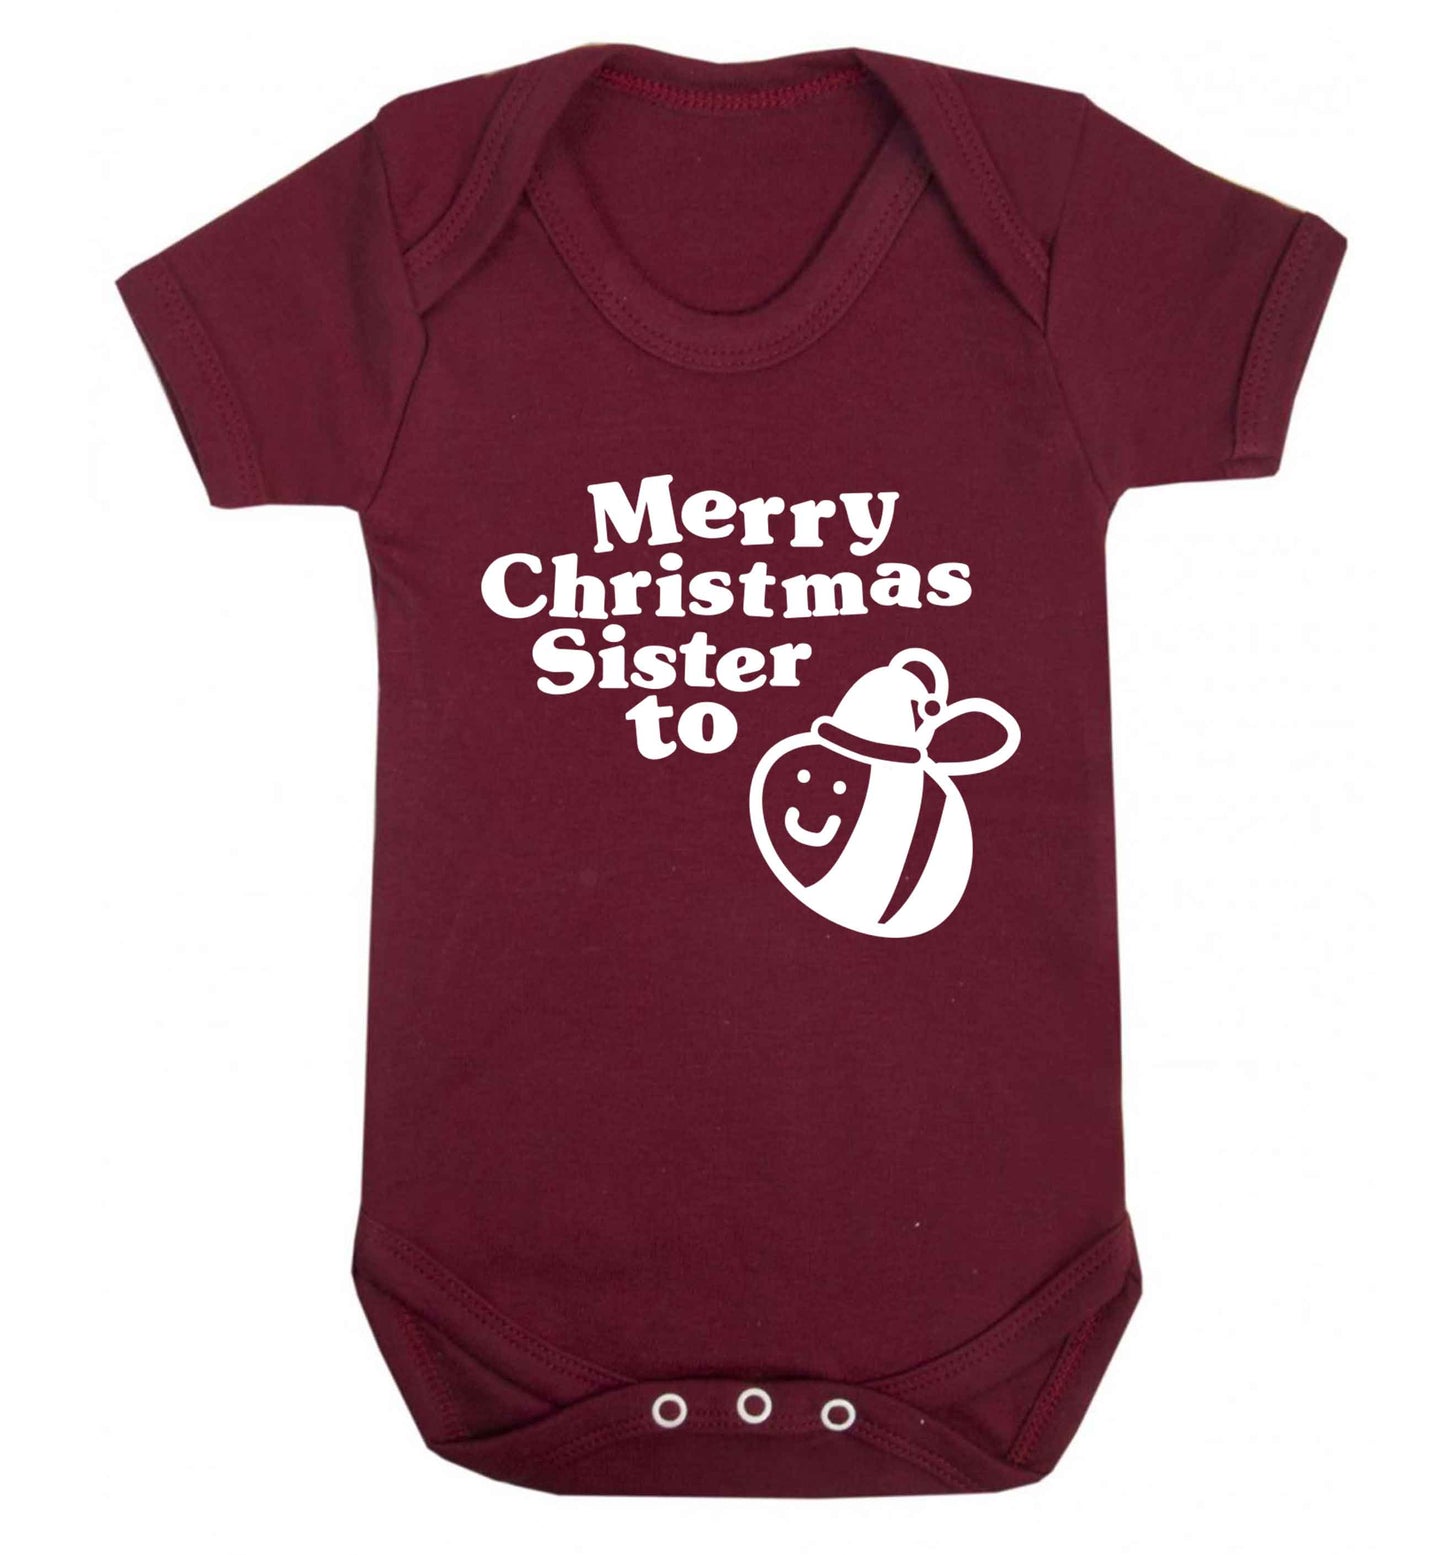 Merry Christmas sister to be Baby Vest maroon 18-24 months